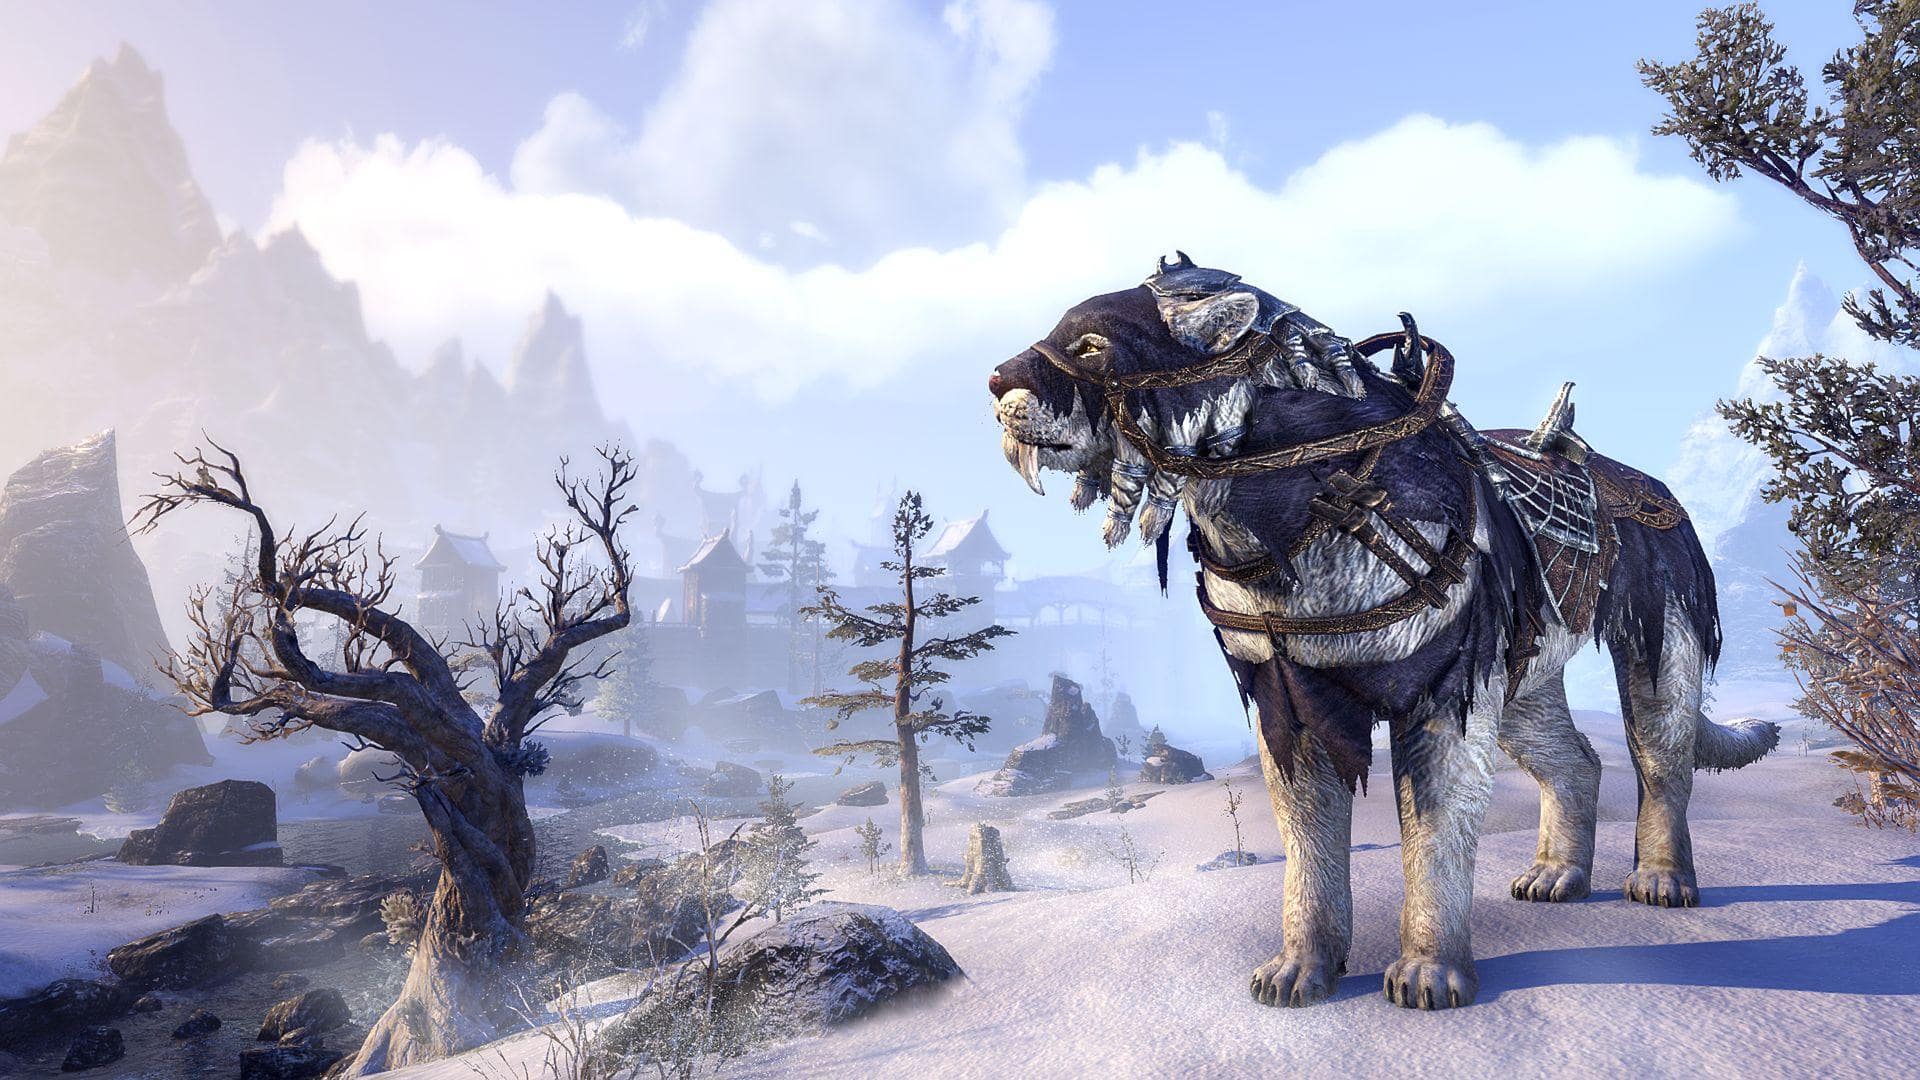 ESO - Don't Miss Out on The Undaunted Celebration Event 